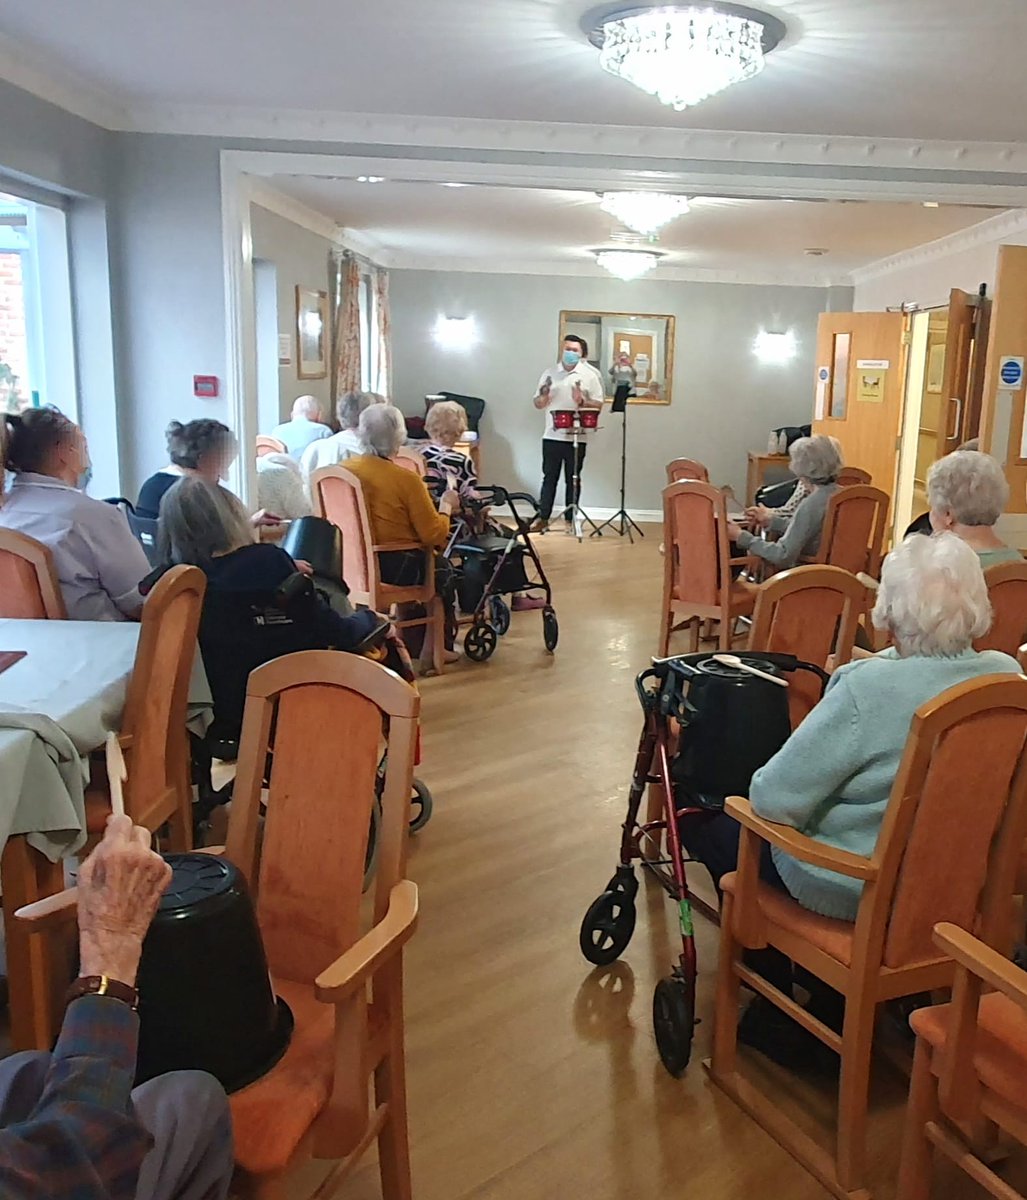 This morning our session was cancelled due to covid😔.This afternoon though we had a fun Buckets For Bongos session in another new care home.Lovely to see new happy faces! 

#BucketsforBongos #musictherapysession #carehomesuk #carehomeactivities #dementia #wellbeing